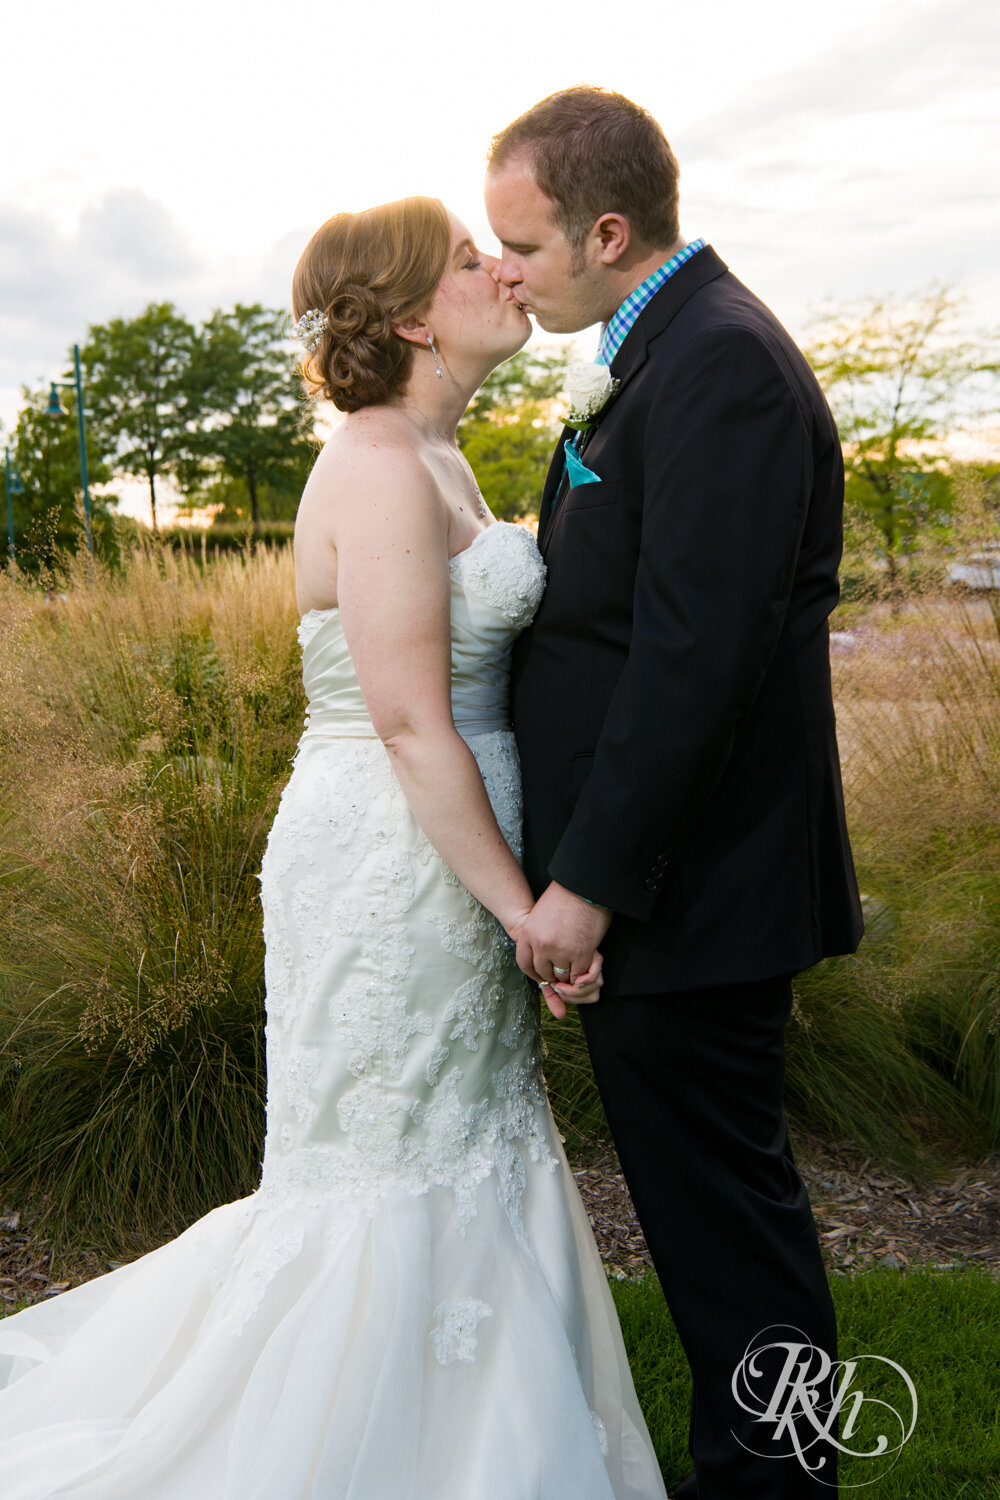 Bride and groom kiss during sunset at Eagan Community Center in Eagan, Minnesota.